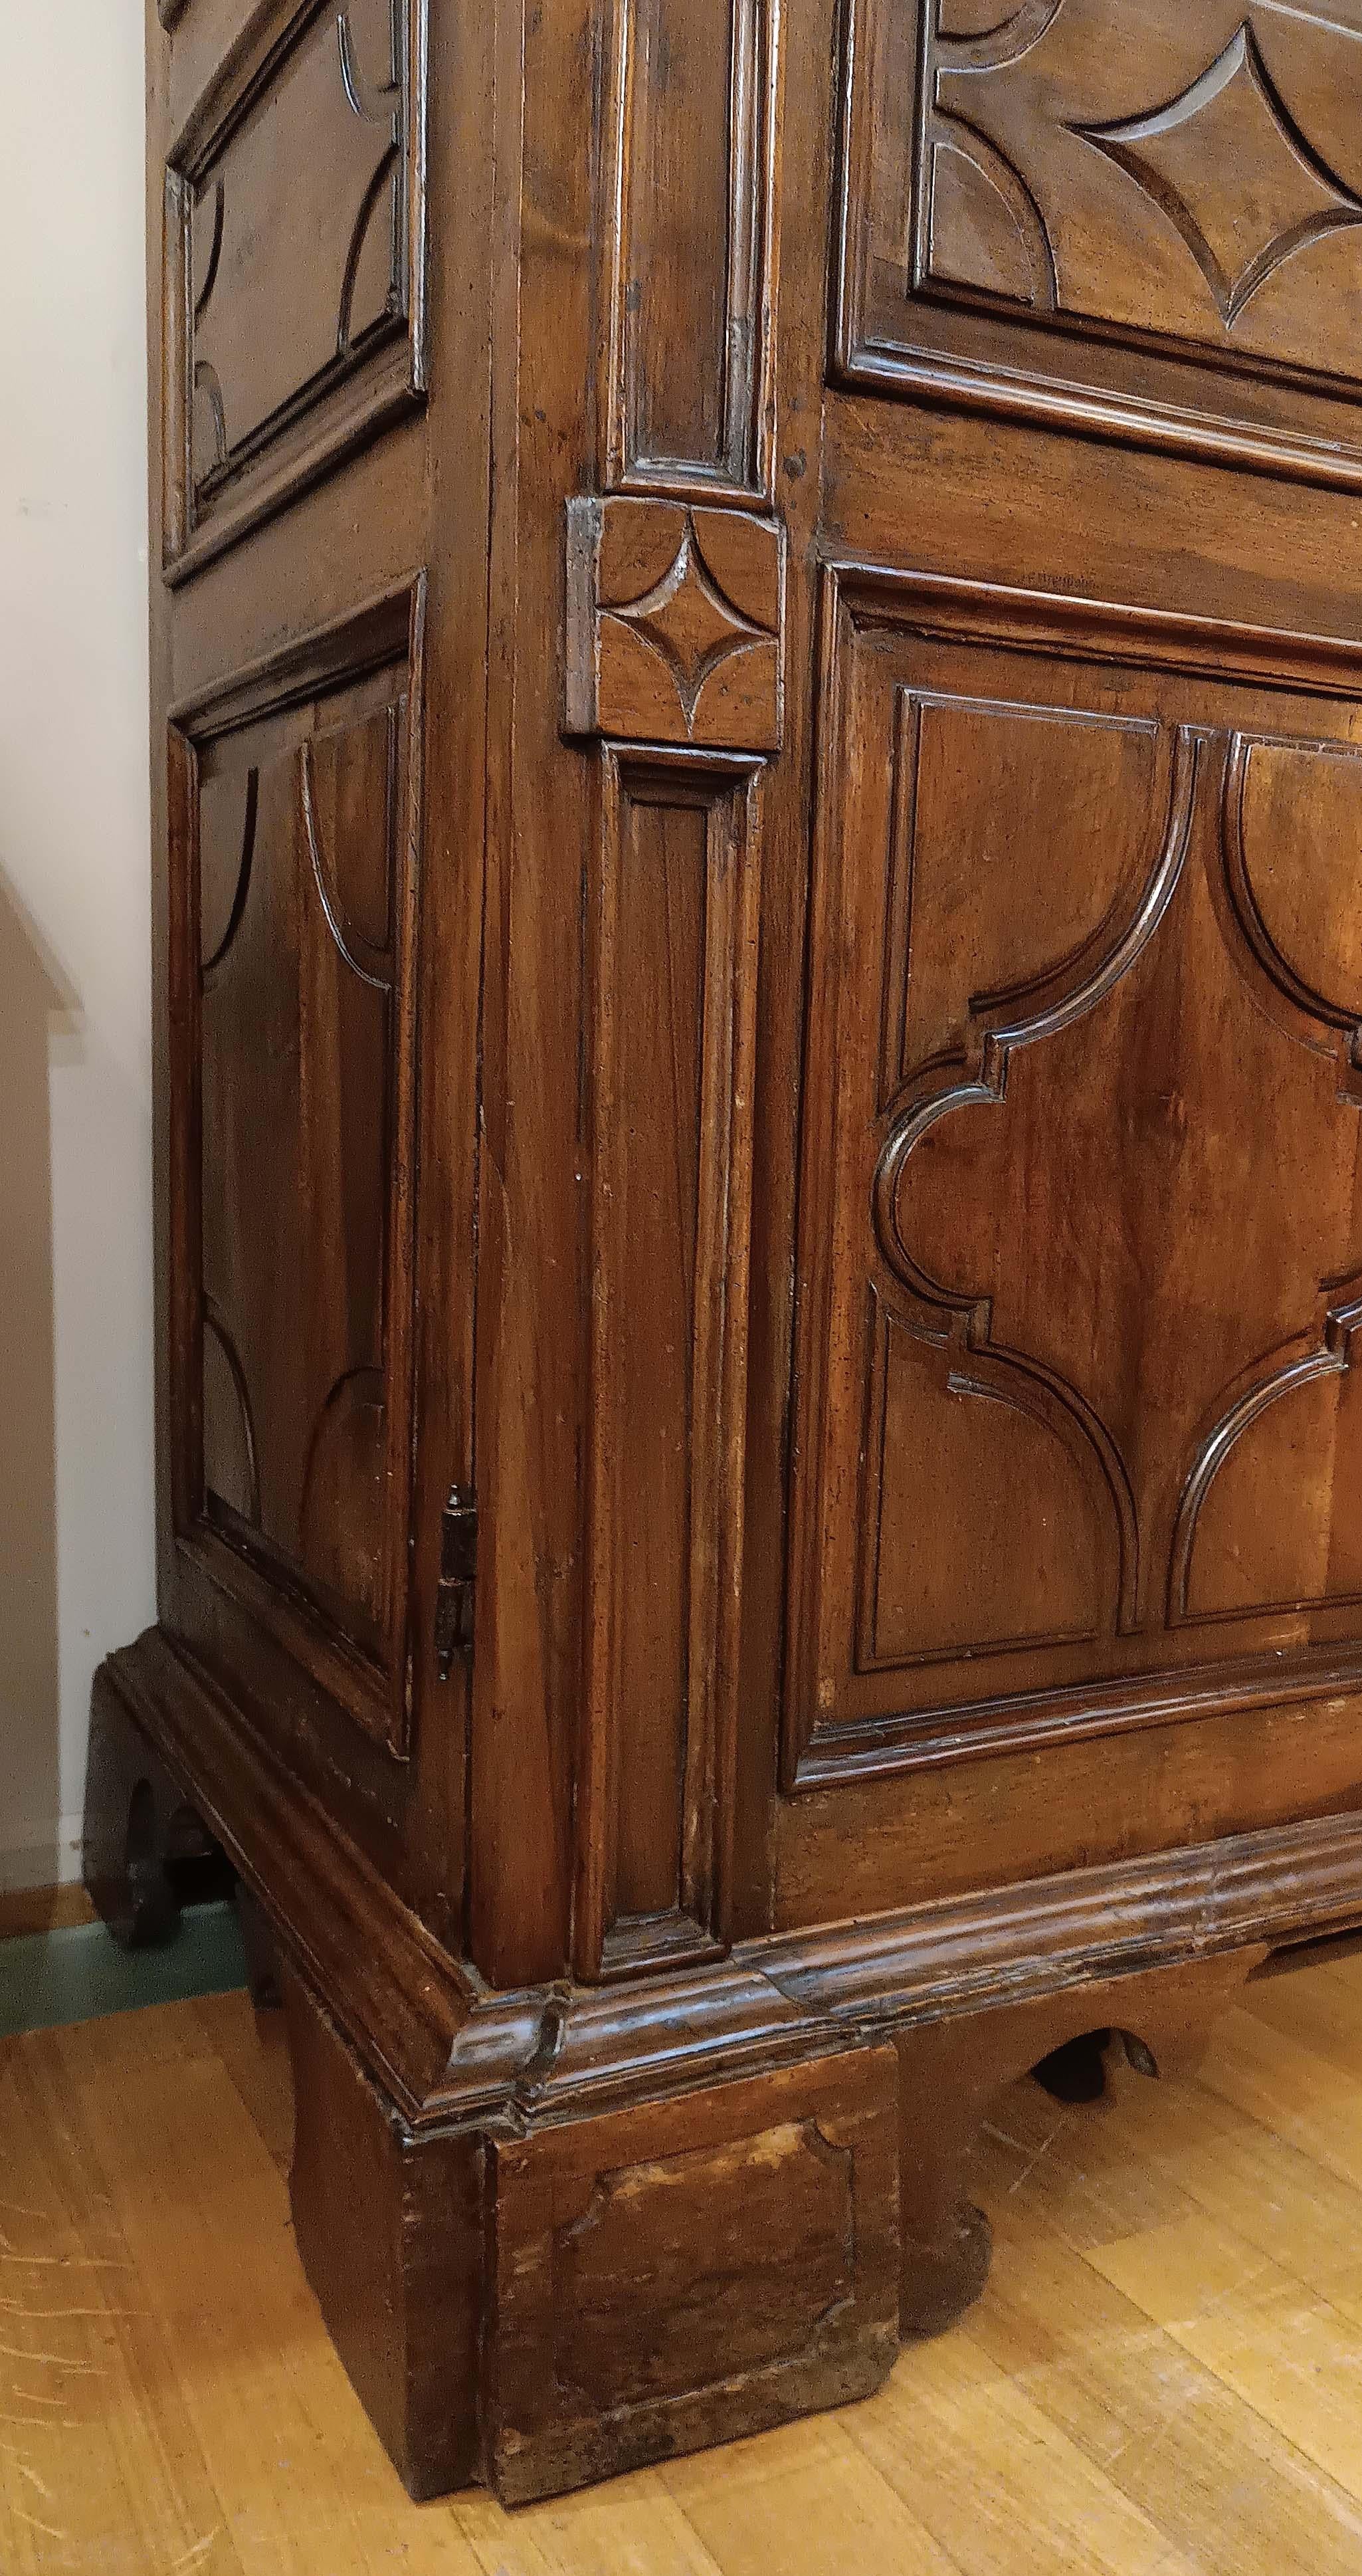 END OF THE 17th CENTURY LOUIS XIV WARDROBE IN SOLID WALNUT In Good Condition For Sale In Firenze, FI